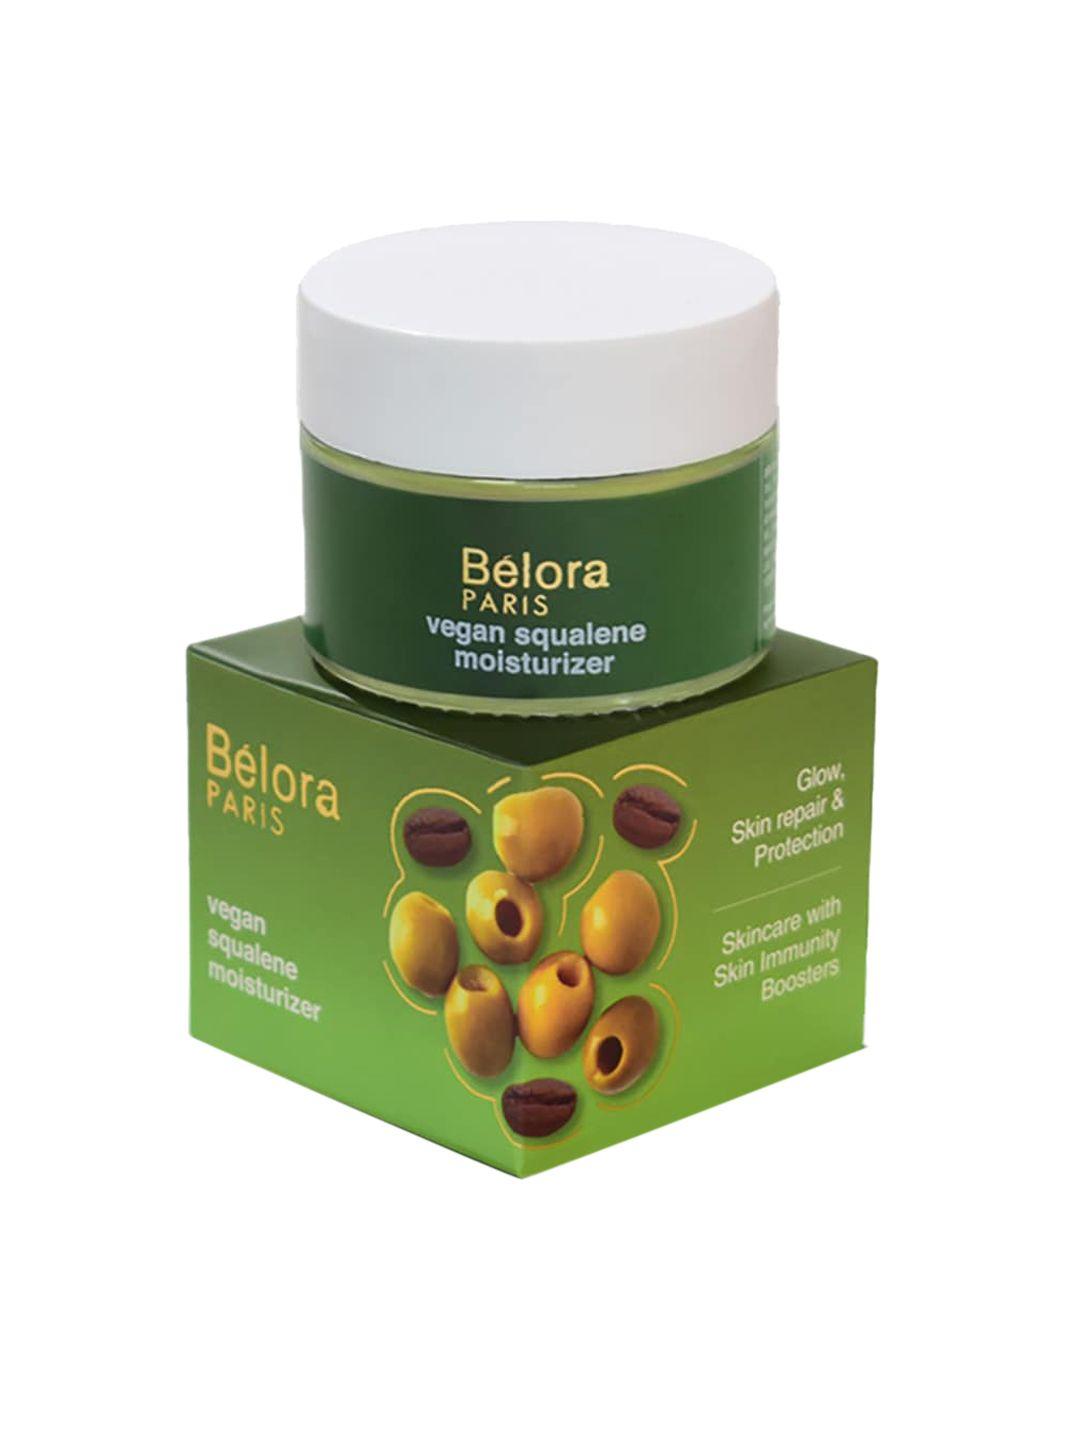 belora paris vegan squalene moisturizer with coffee seed extract for youthful skin - 50ml